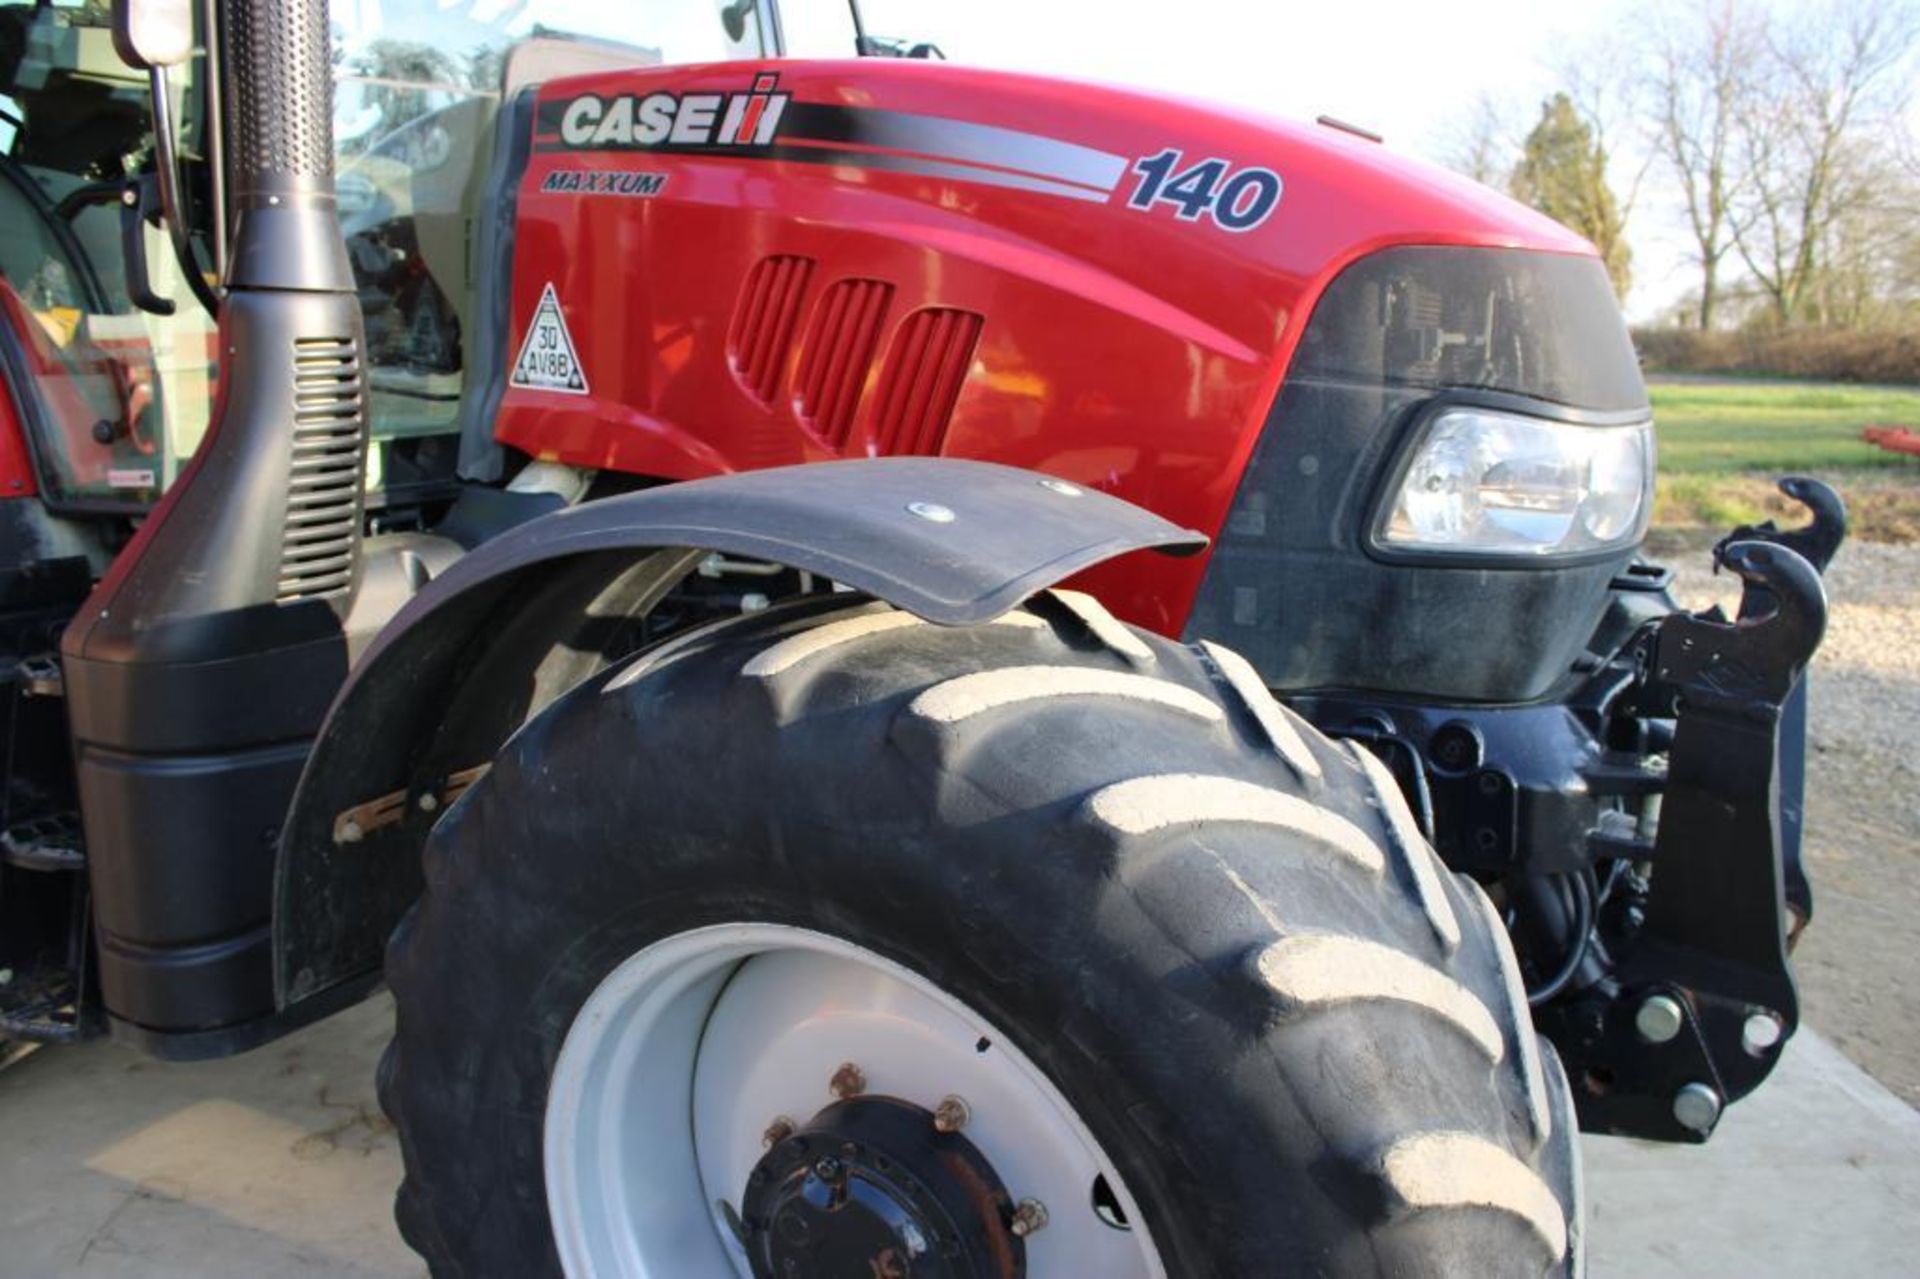 2013 Case Maxxum 140 50kph 4wd Powershift tractor with multicontroller joystick, front linkage, cab - Image 19 of 40